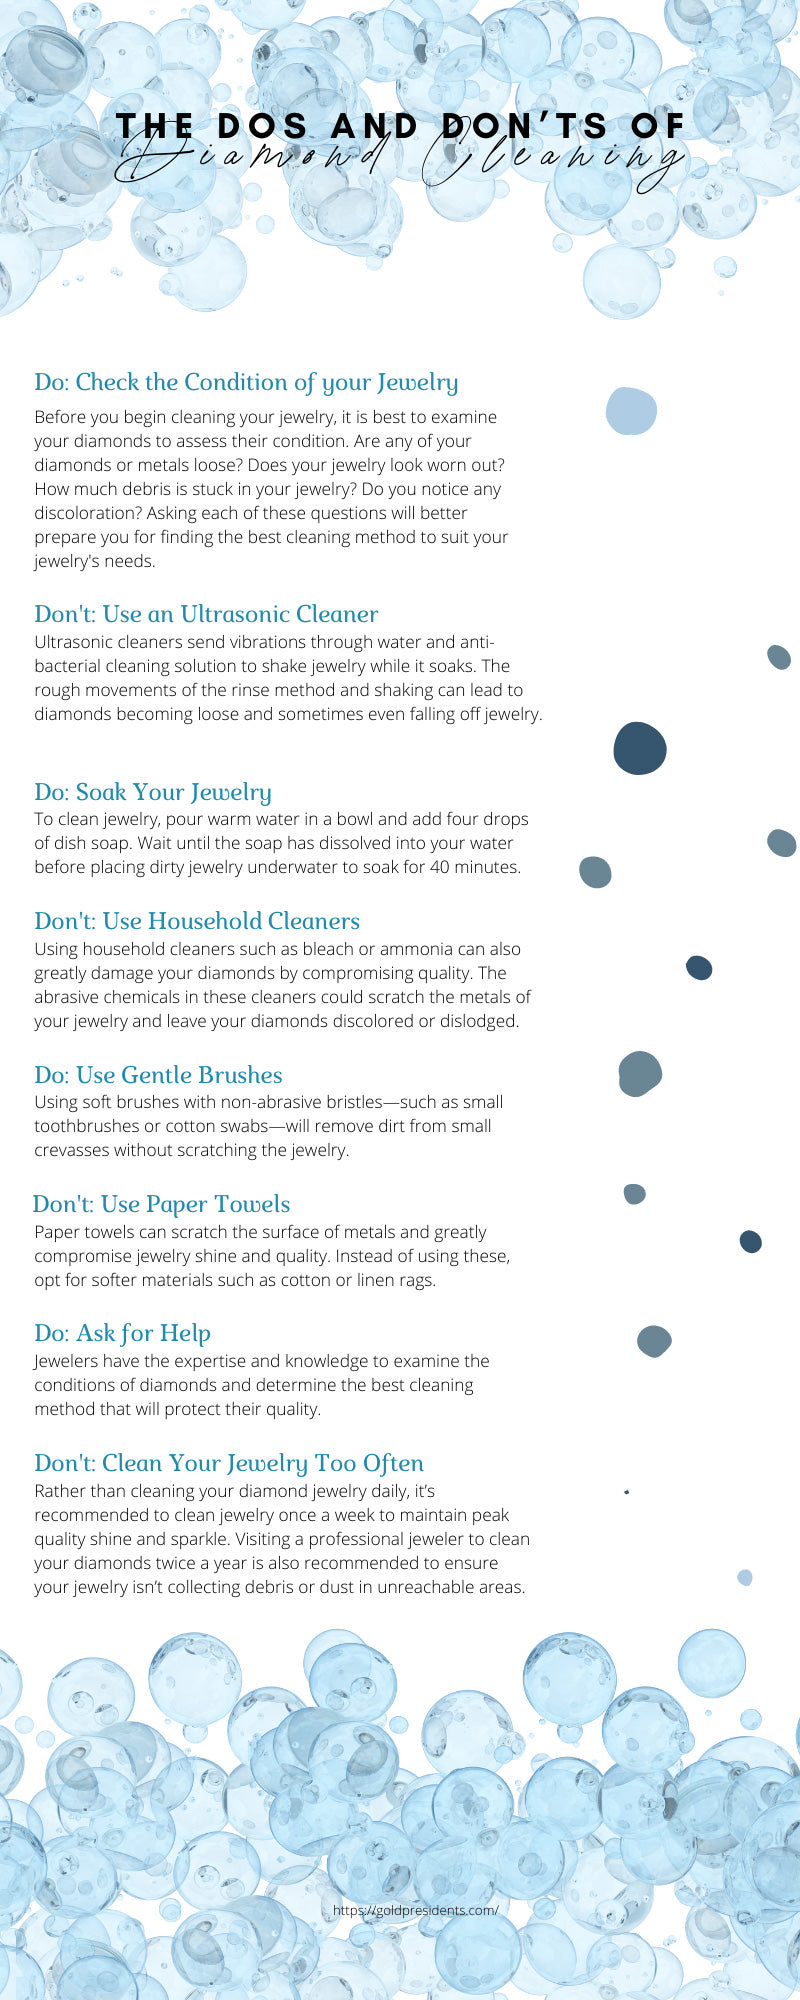 The Dos and Don’ts of Diamond Cleaning